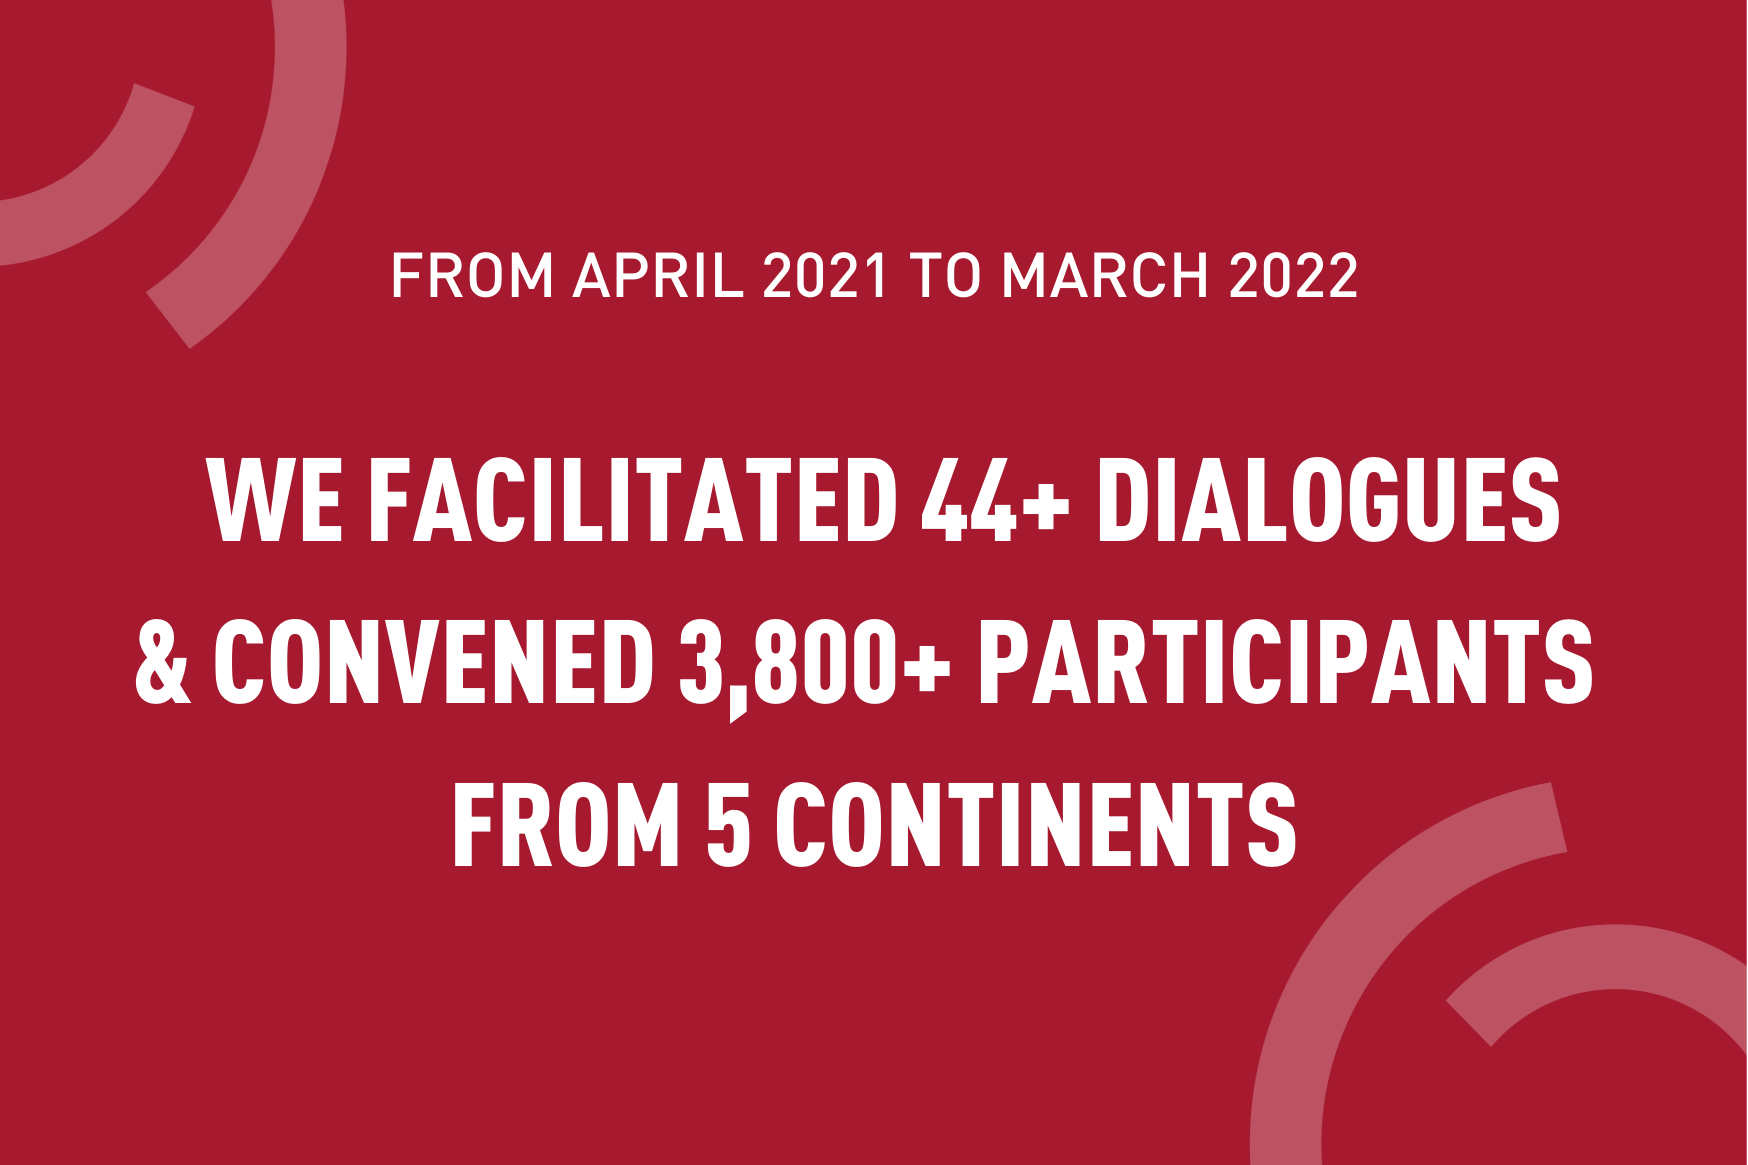 Text: From April 2021 to March 2022, we facilitated 44+ dialogues and convened 3,800+ participants from 5 continents  